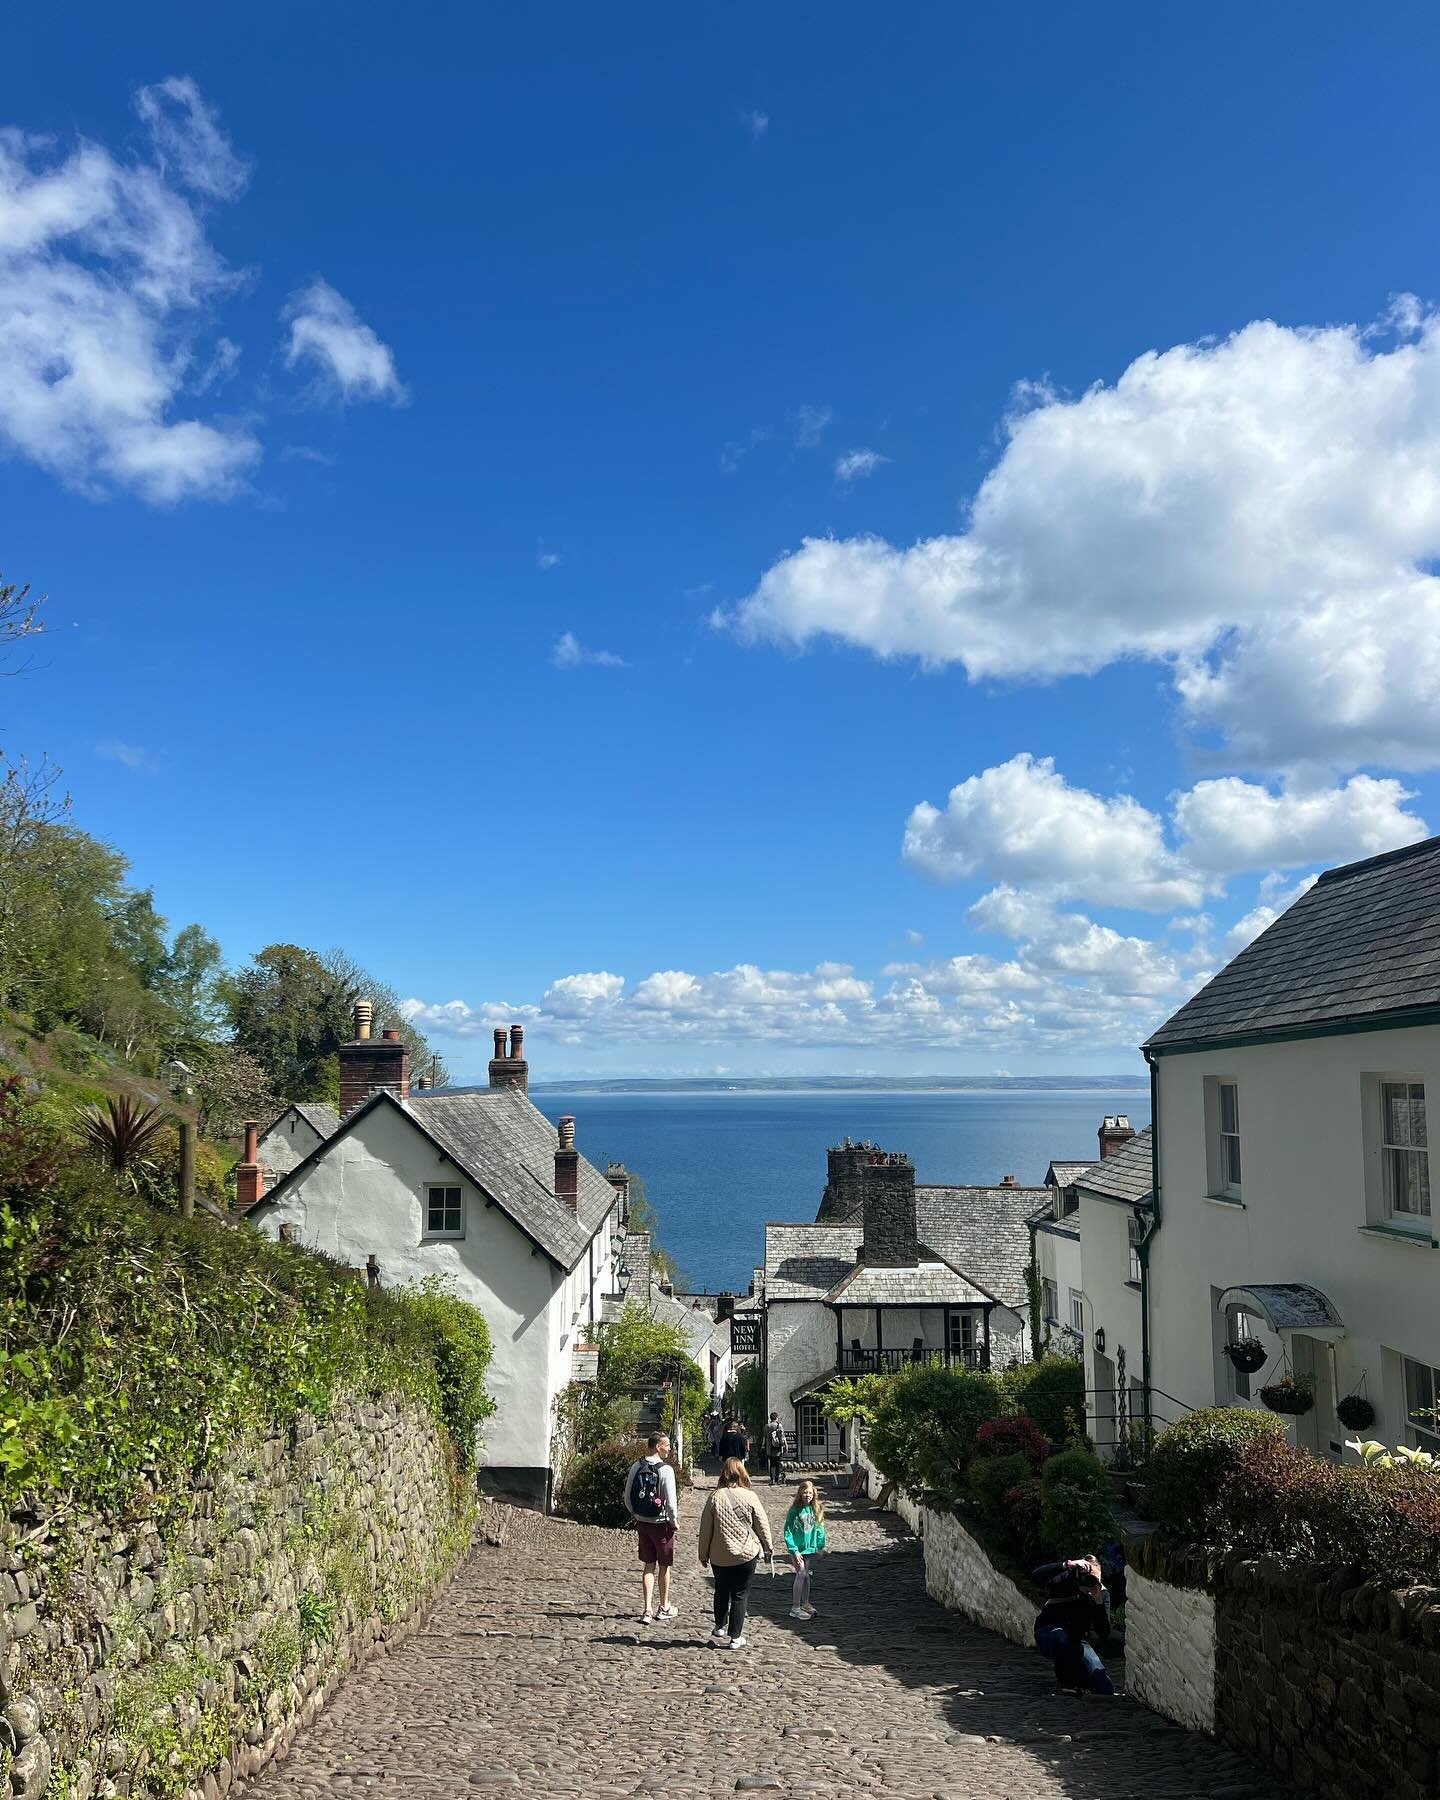 The North Devon coast is blasted by the Atlantic in the winter months, but come spring, it gives way to warmer days and calmer seas. The countryside metamorphoses into shades of verdant green.

Clovelly, an ancient, cobblestoned village, hugs the nor